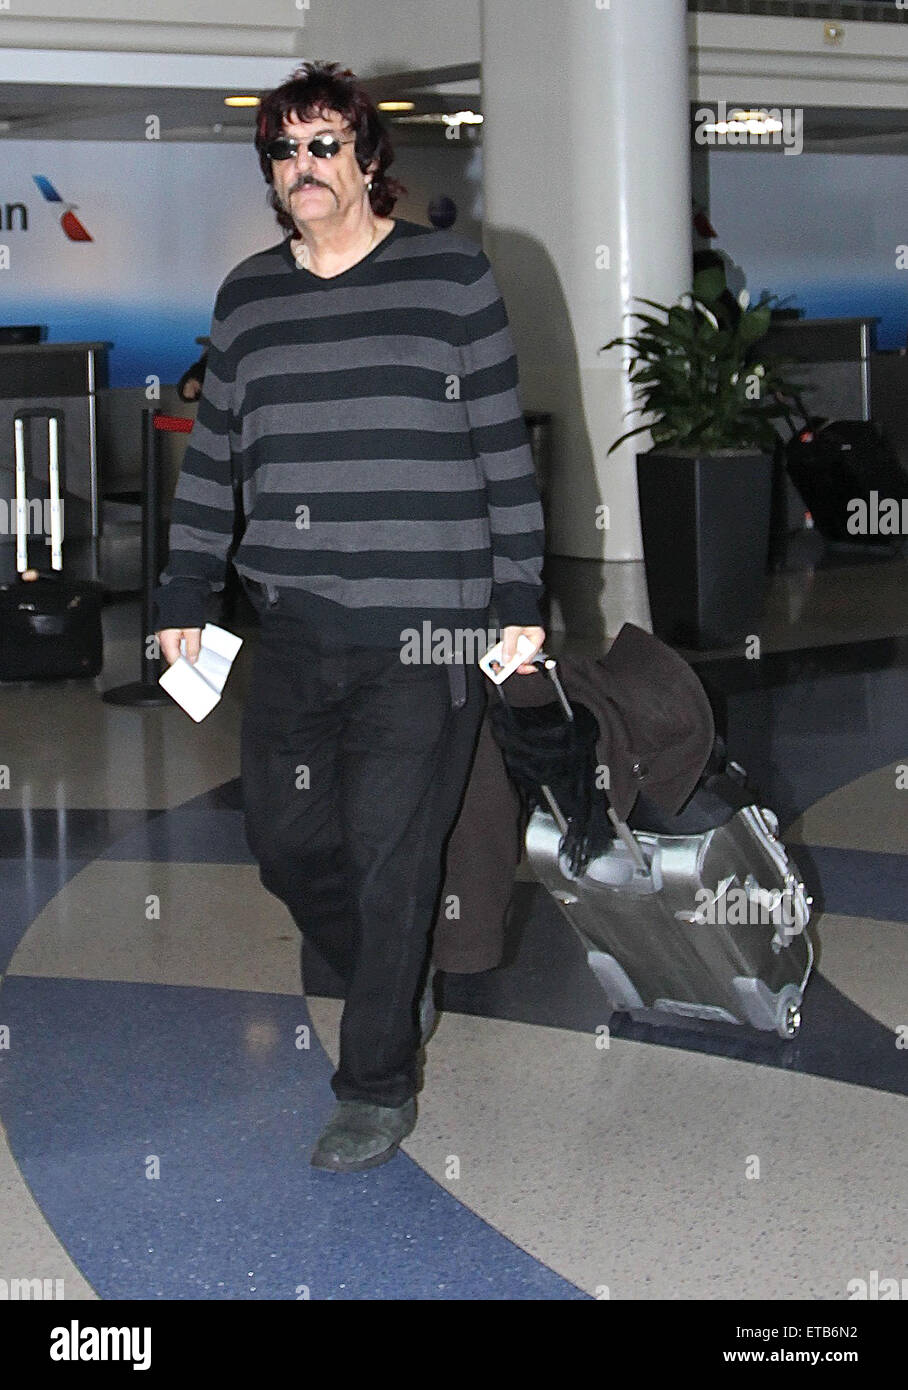 Rock drummer, Carmine Appice departs from Los Angeles International Airport (LAX)  Featuring: Carmine Appice Where: Los Angeles, California, United States When: 12 Jan 2015 Credit: WENN.com Stock Photo